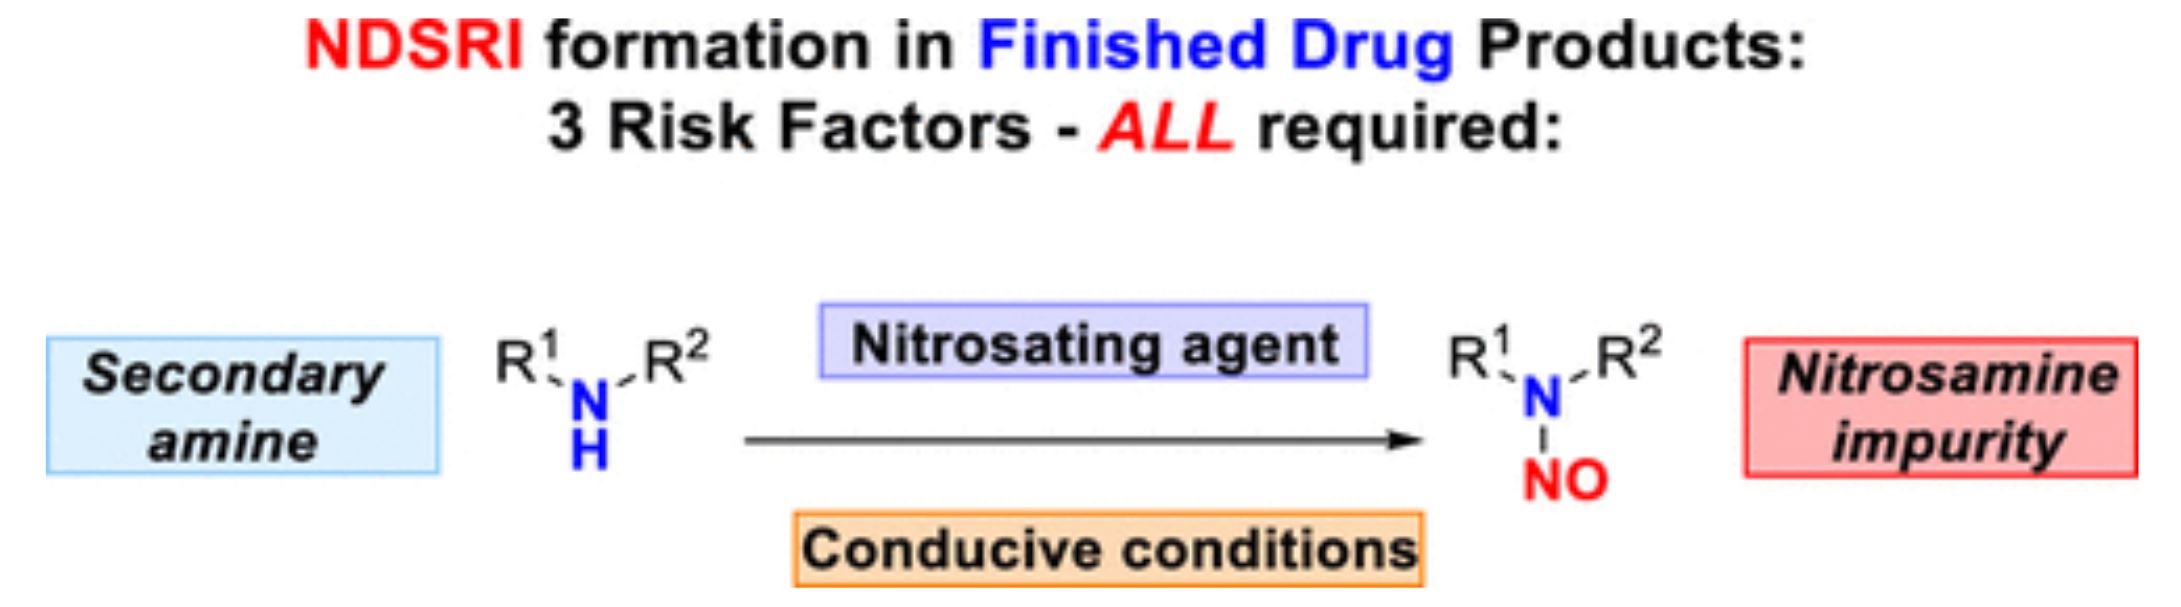 Formation of N-Nitrosamine Drug Substance Related Impurities in Medicines: A Regulatory Perspective on Risk Factors and Mitigation Strategies